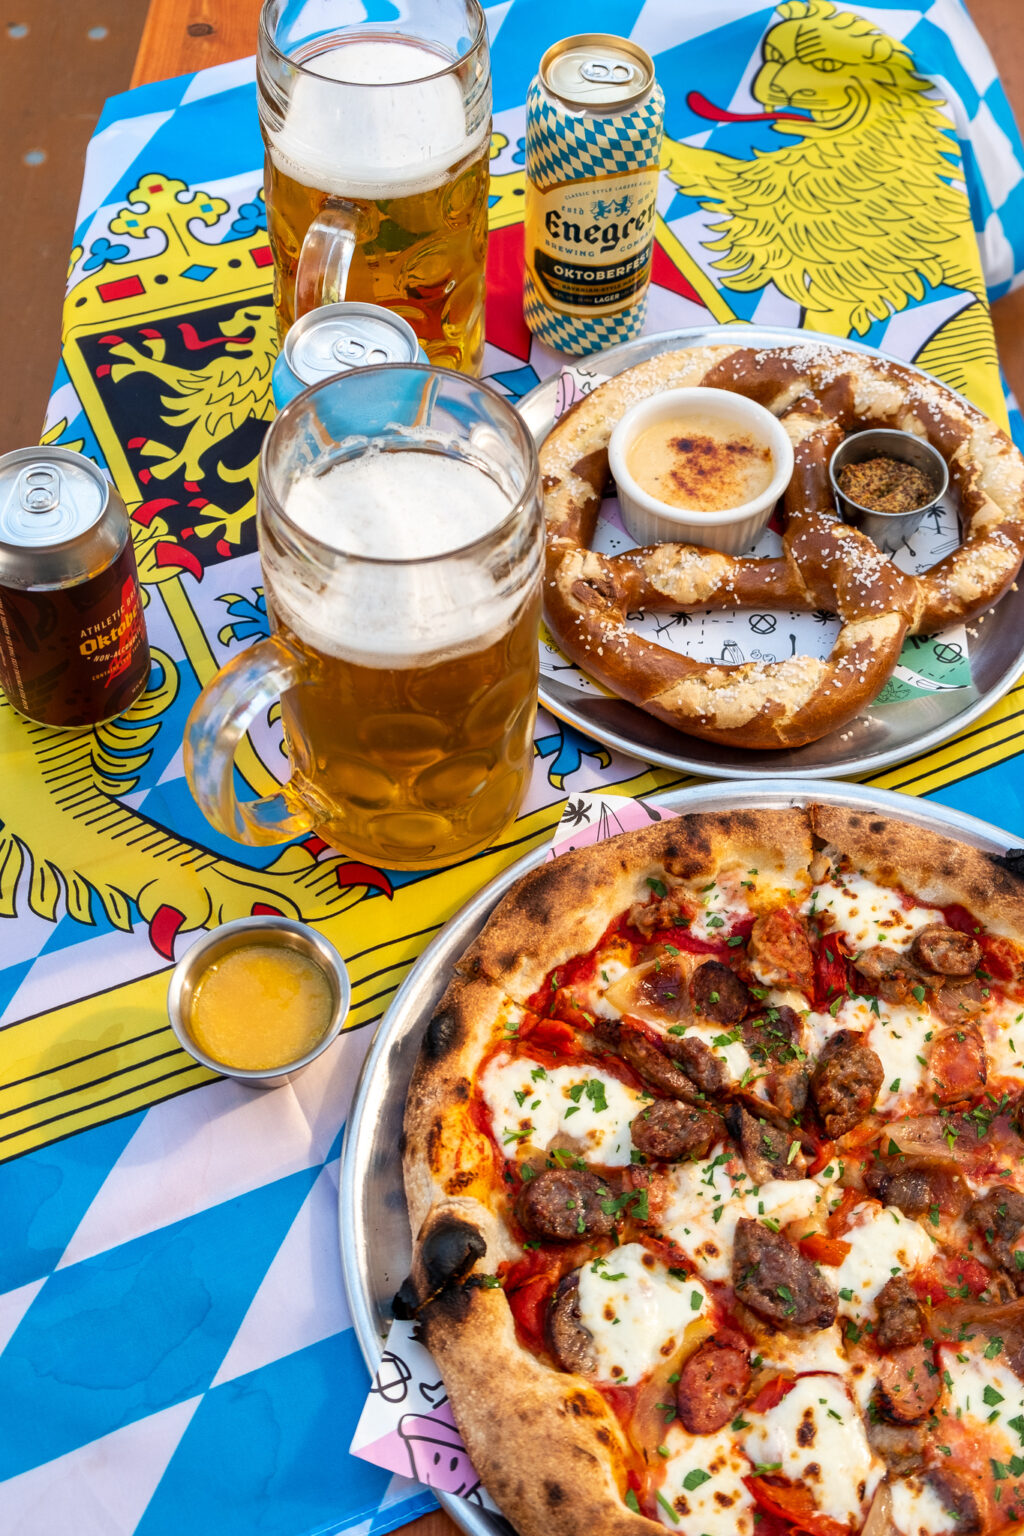 Pitfire Pizza's flagship store in the NoHo Arts District will transform its outdoor patio into a full Oktoberfest beer garden for the weekend from September 24th to October 9th.